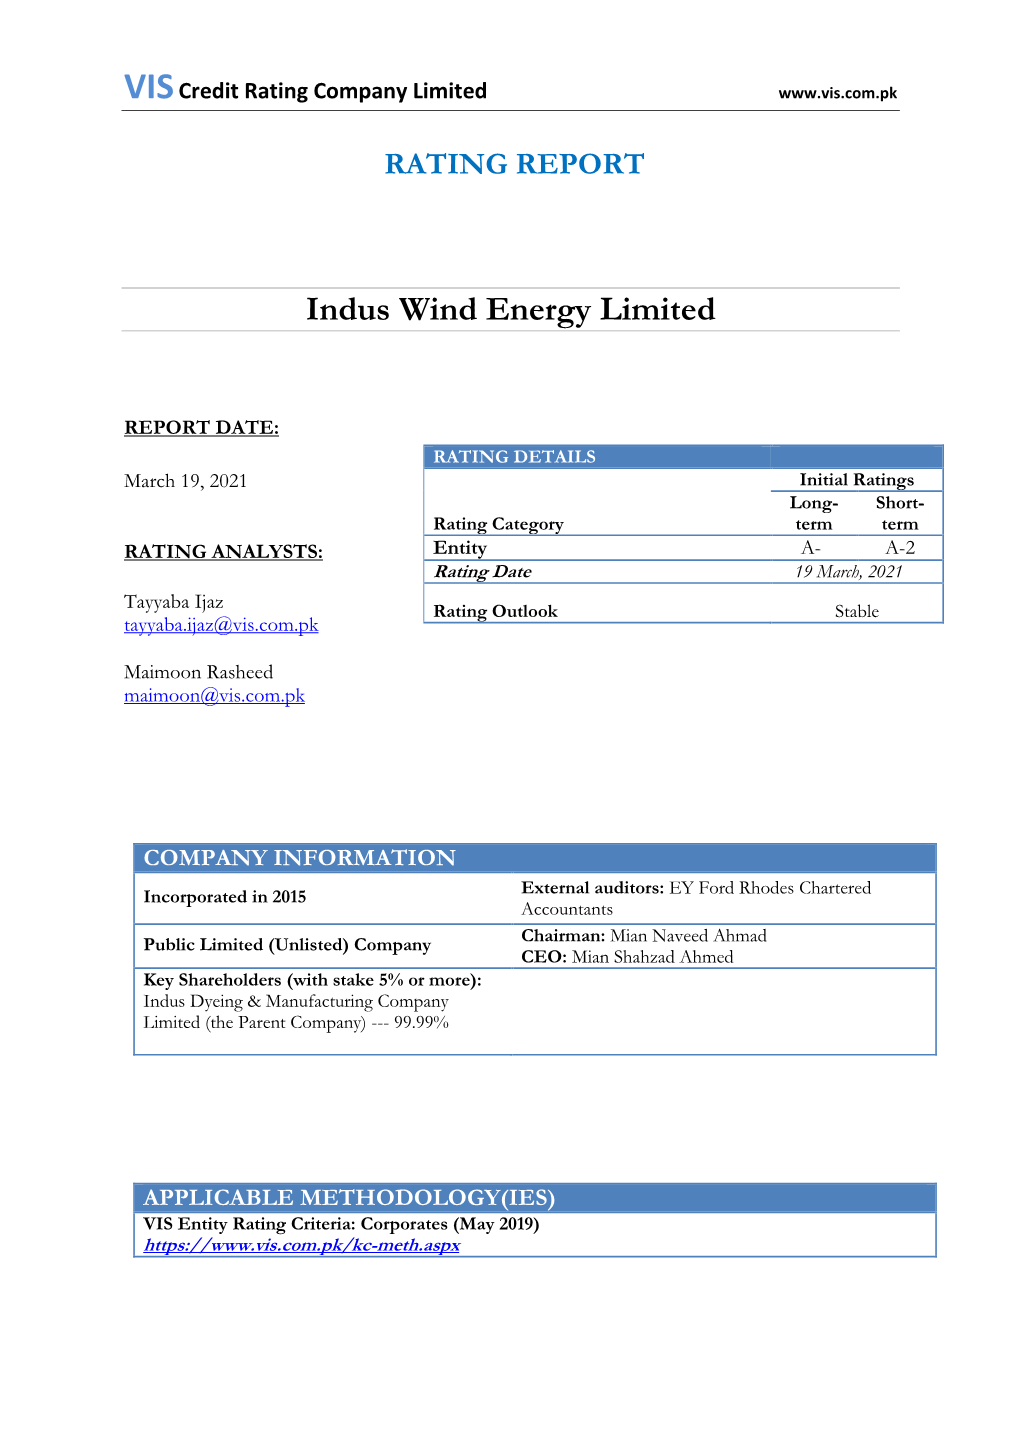 Indus Wind Energy Limited